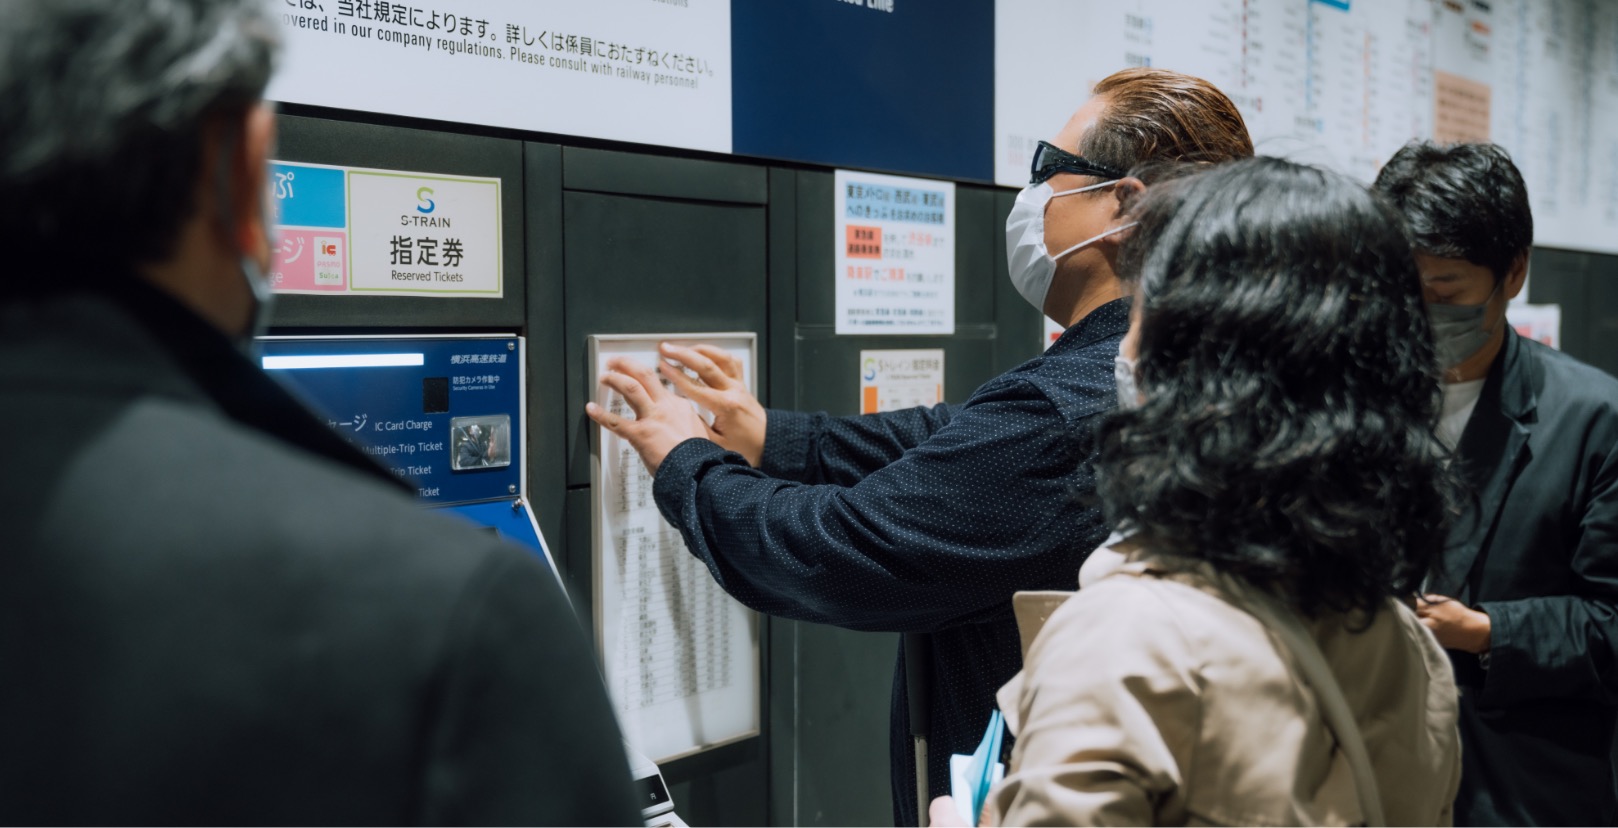 A male with sunglasses touching the price list at a ticketing booth in a train station.